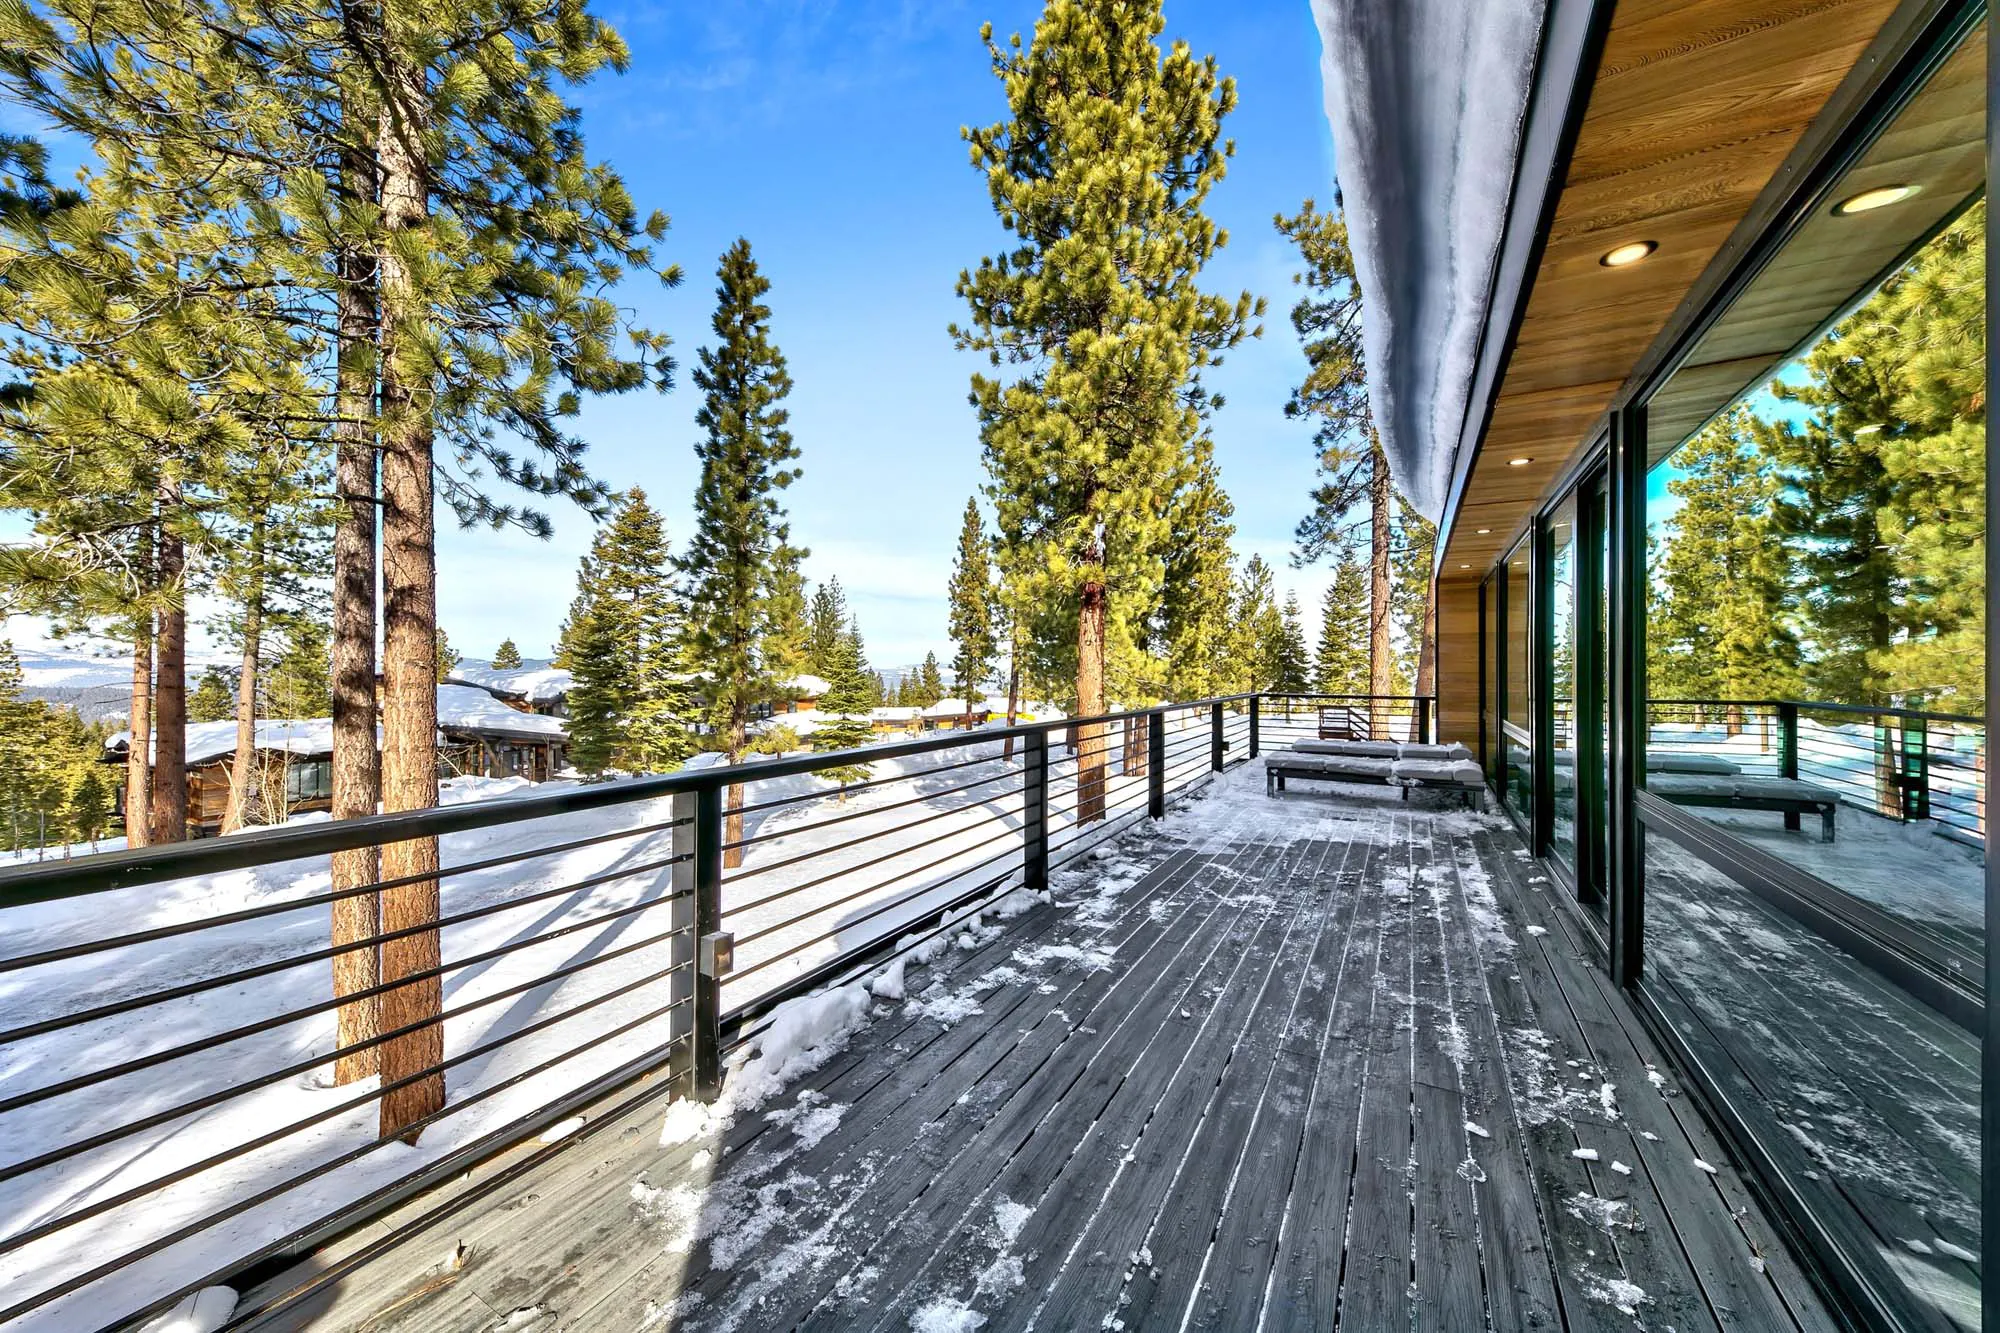 The best way to spend your winter vacation: A luxury mountain escape in Tahoe! – Presented by Wander Tahoe Slopes